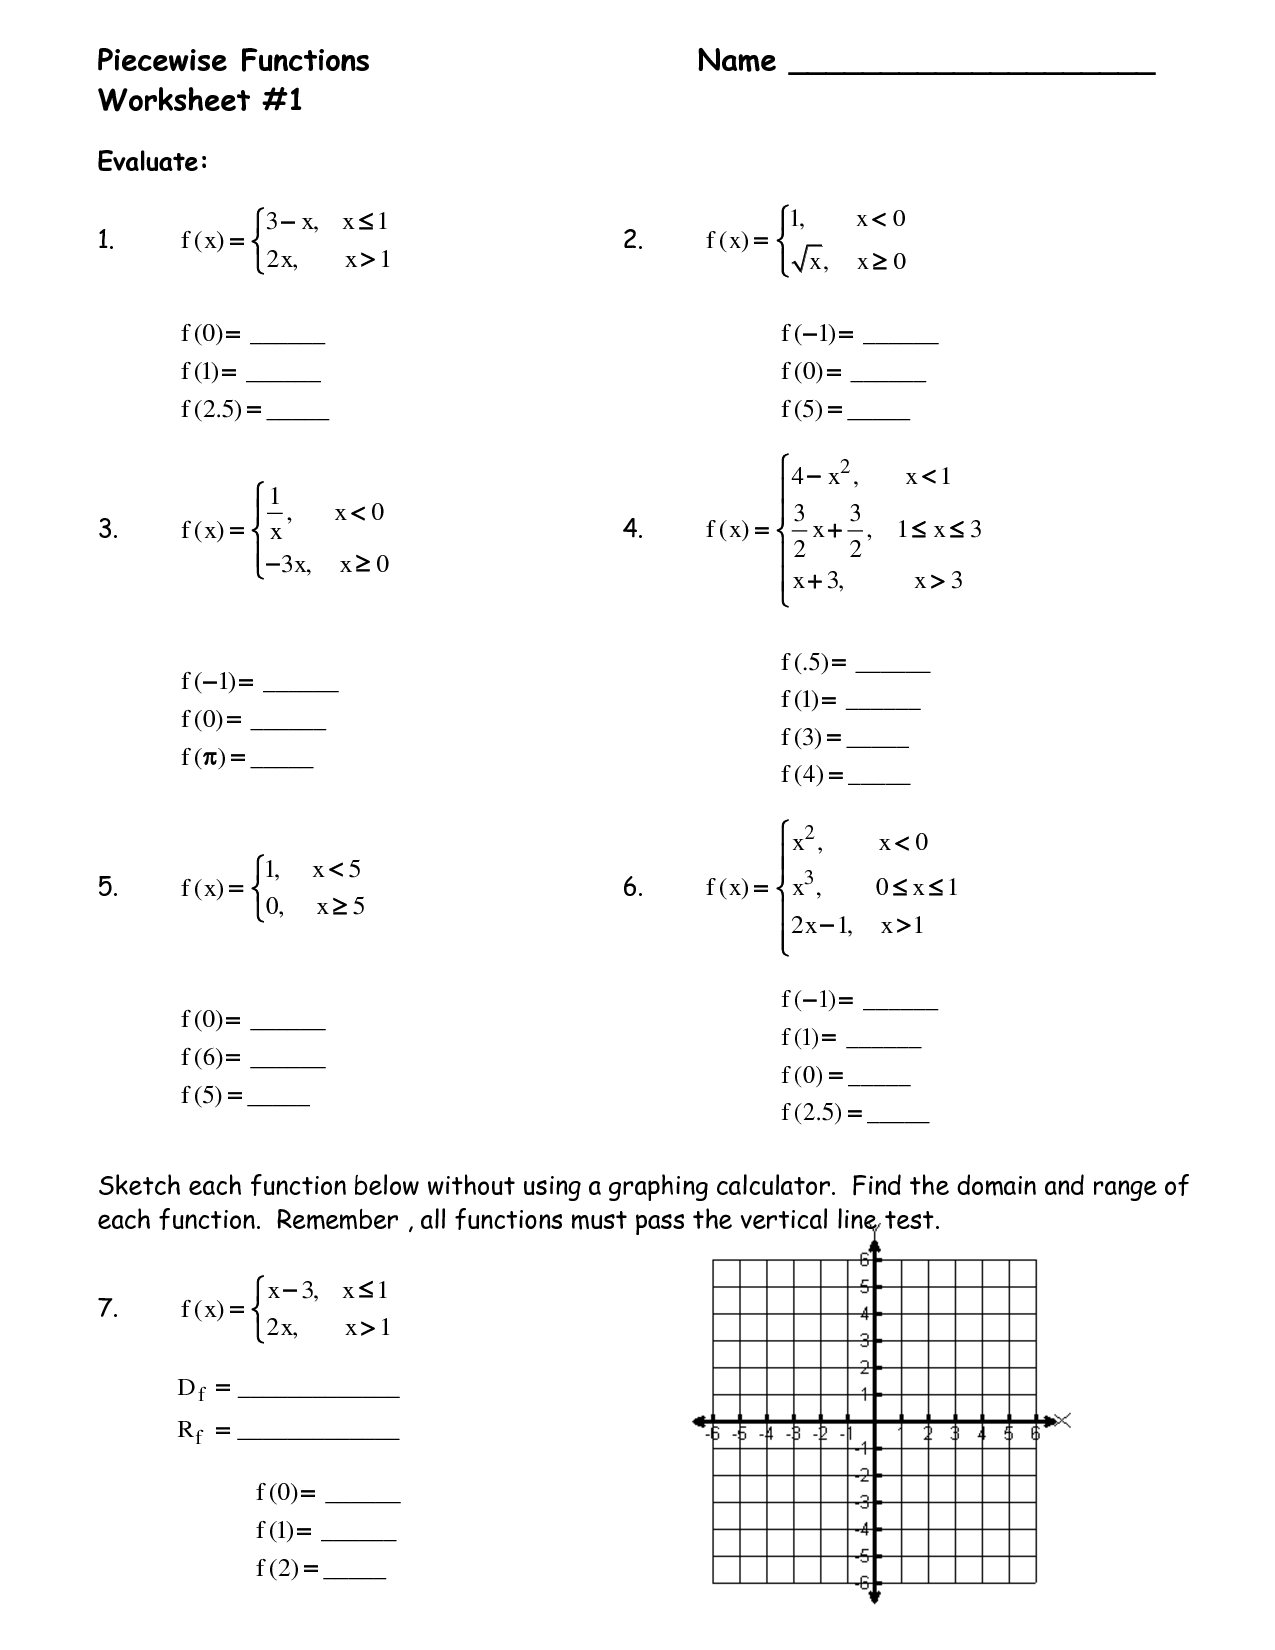 piecewise-functions-practice-worksheet-with-answers